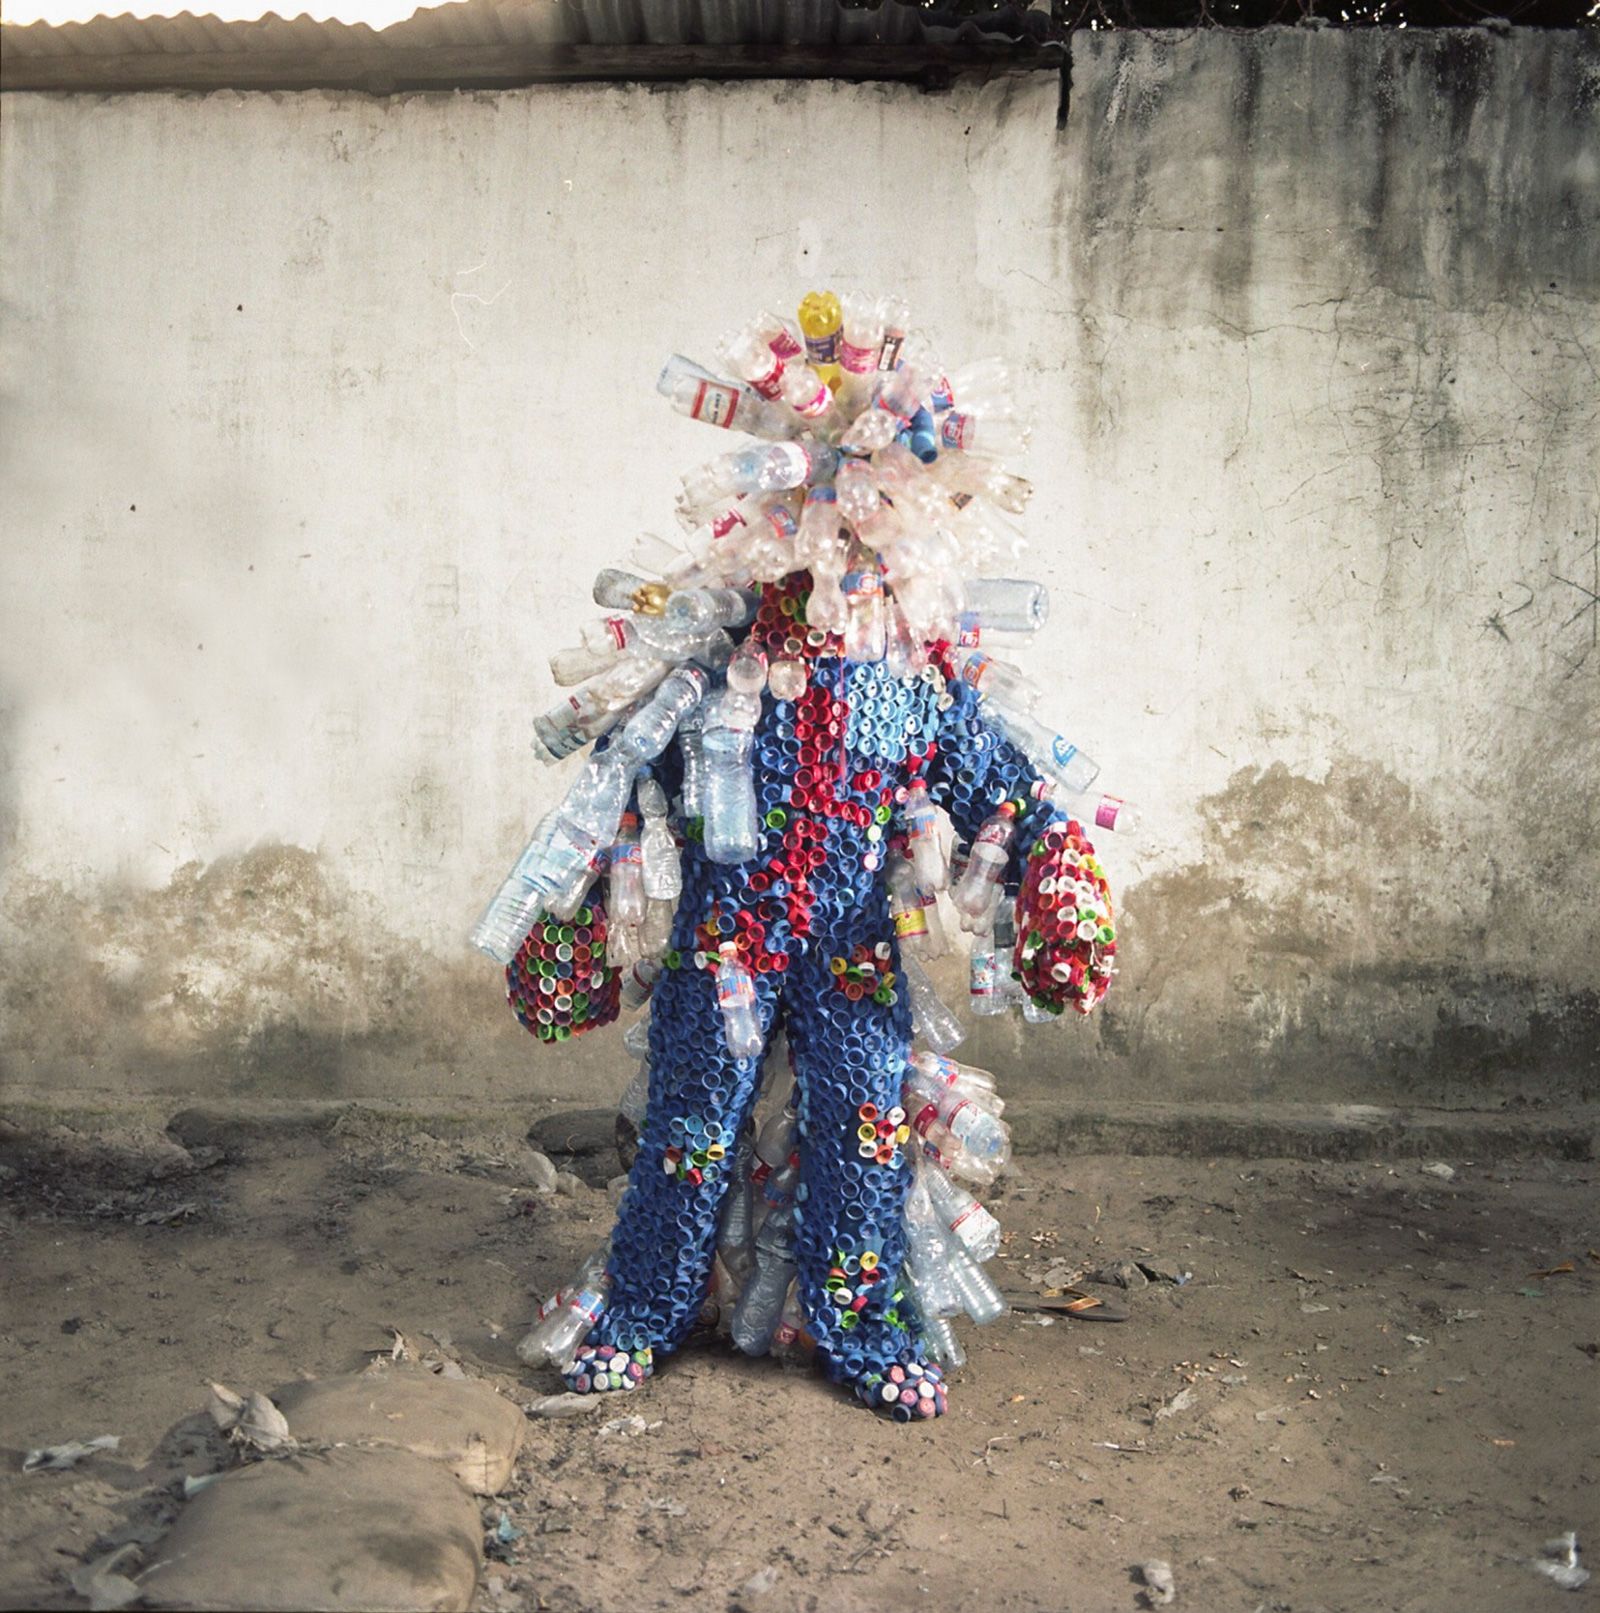 Congolese artists wear costumes made of trash to shine a light on  Kinshasa's pollution problem